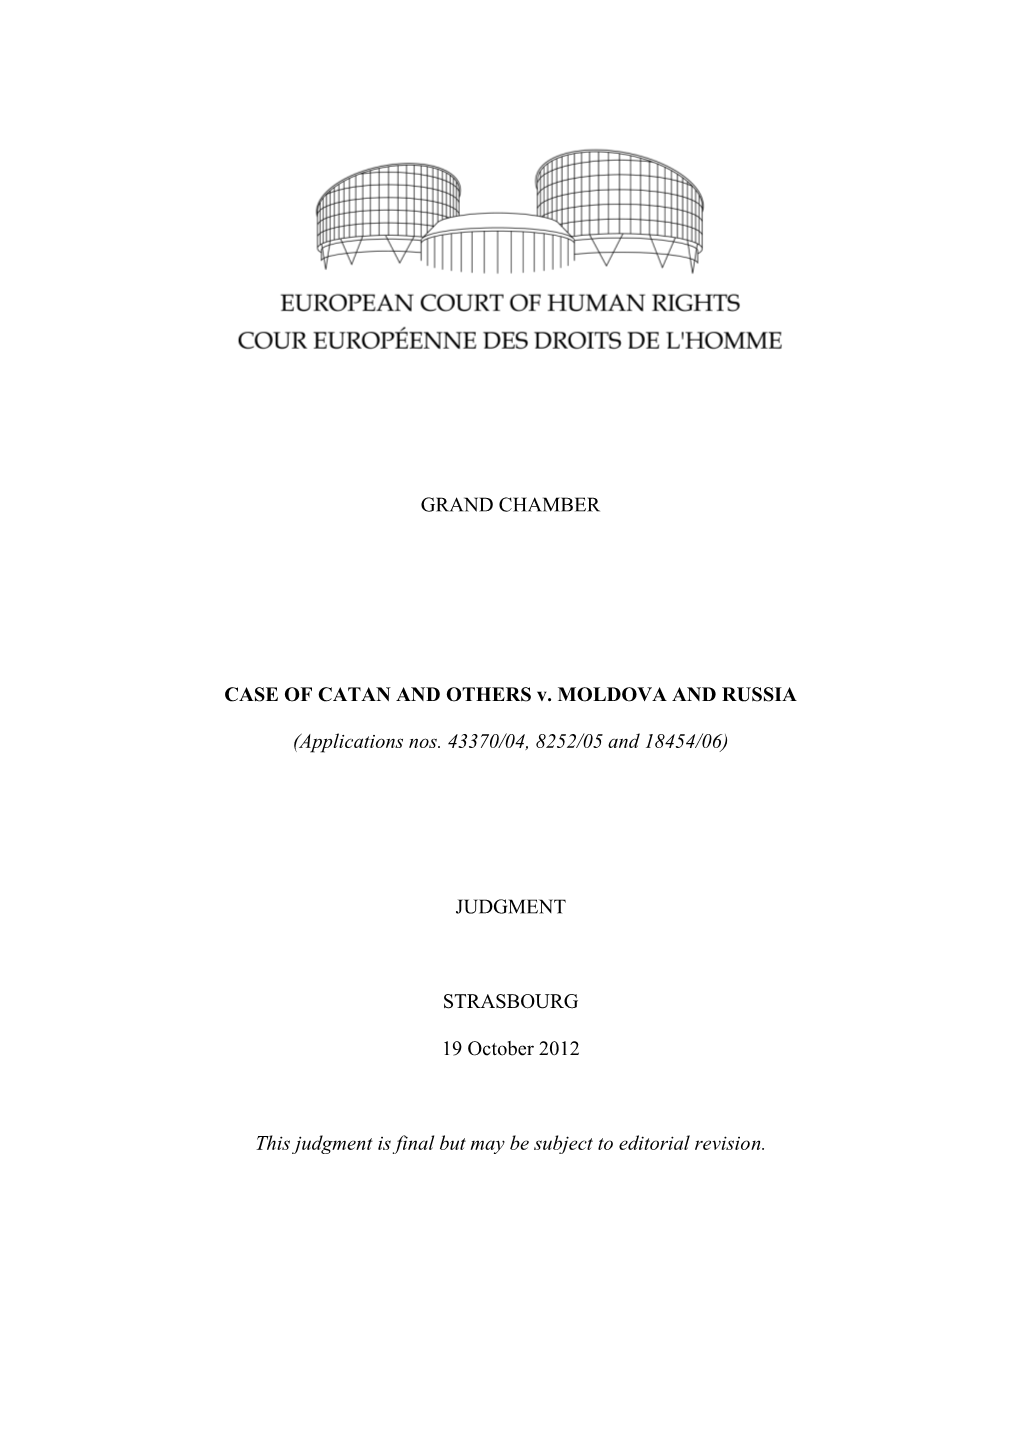 GRAND CHAMBER CASE of CATAN and OTHERS V. MOLDOVA and RUSSIA (Applications Nos. 43370/04, 8252/05 and 18454/06) JUDGMENT STRASBO